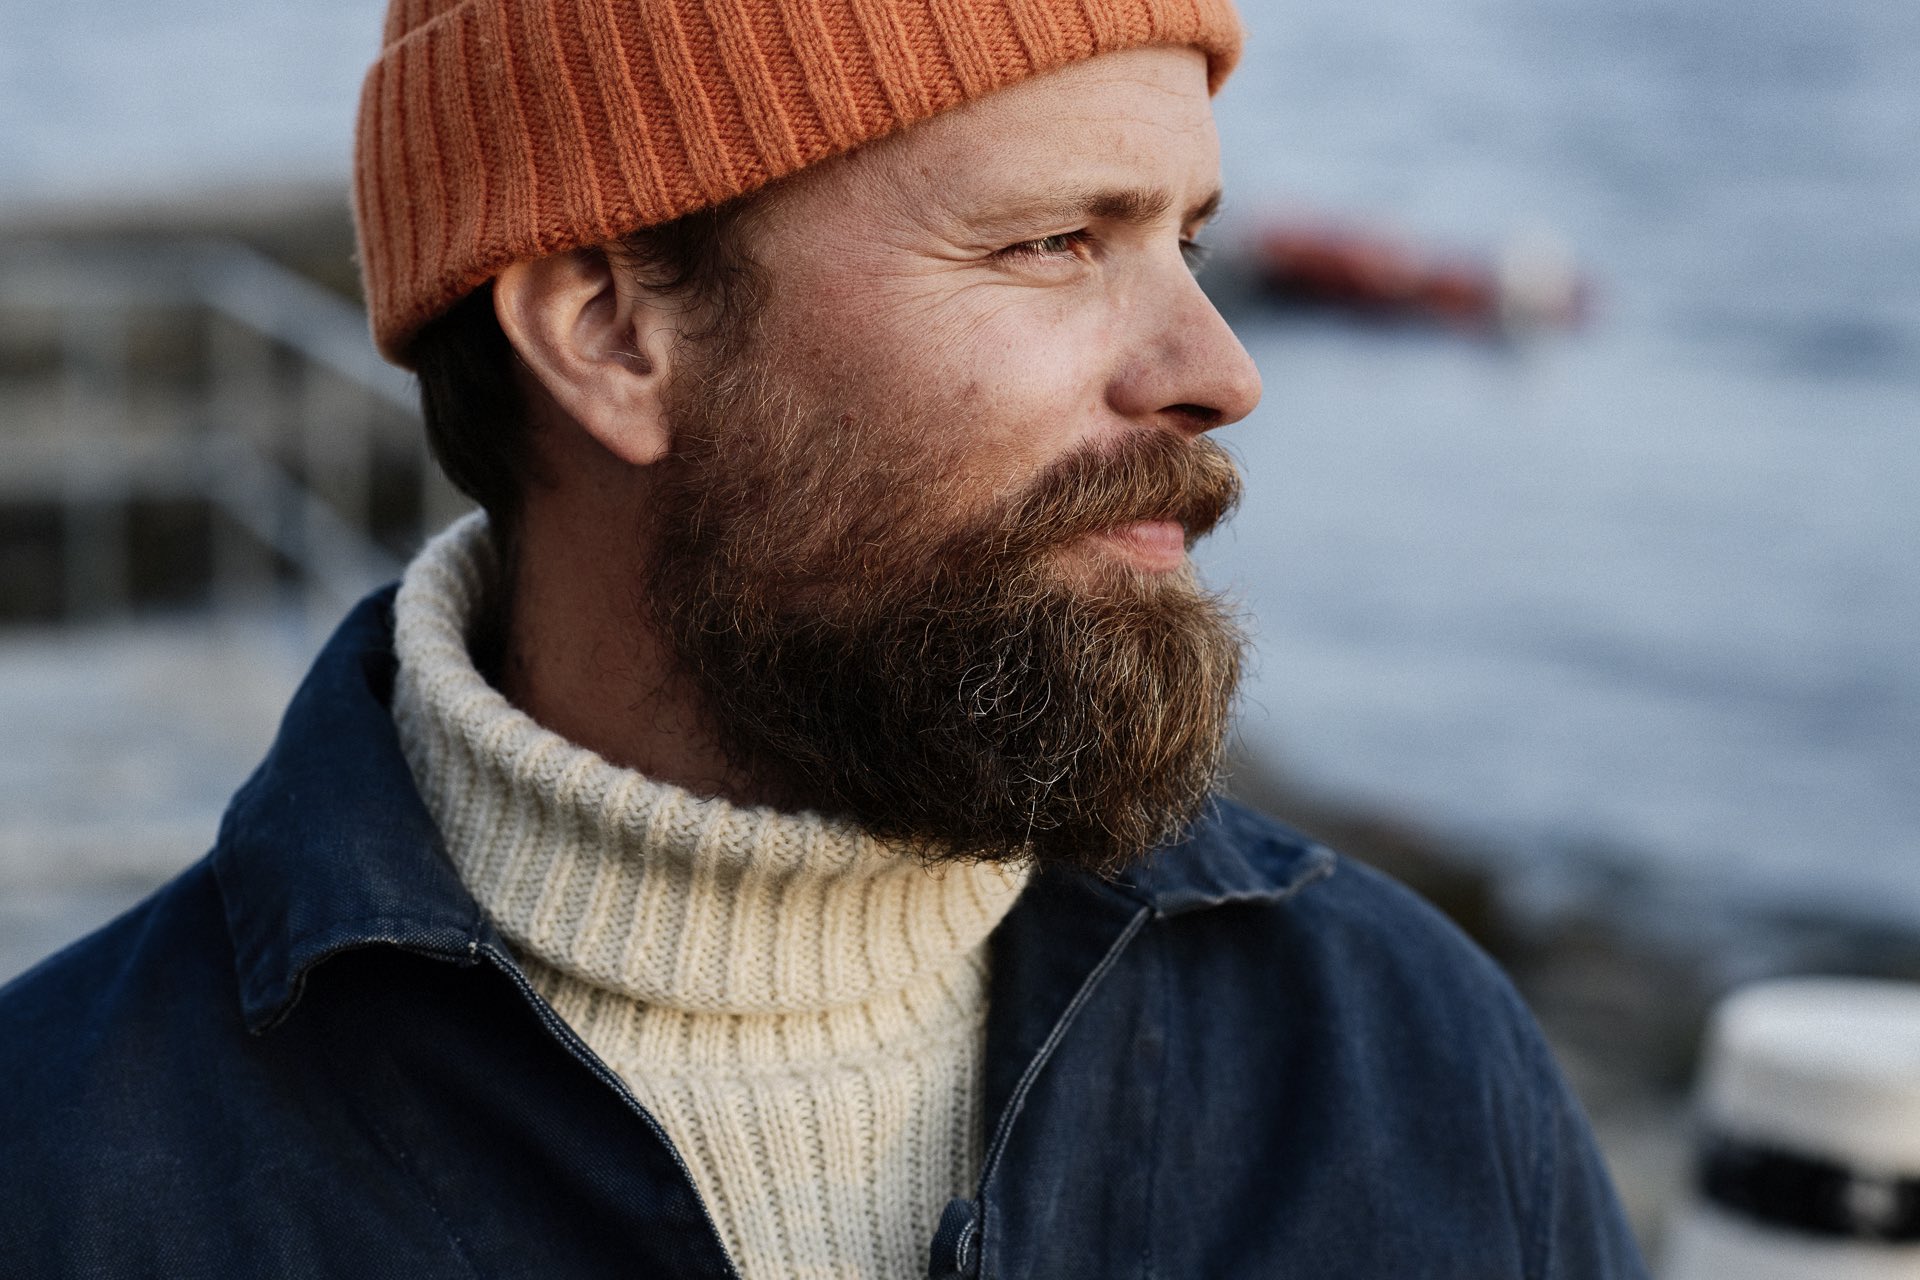 Johan Brand on Twitter: "@tedcooke And we @EntrepreneurShipOne wear orange beanies as a homage Steve Zizzou, which is a homage to Cousteau and makes us stand out other Entrepreneurs